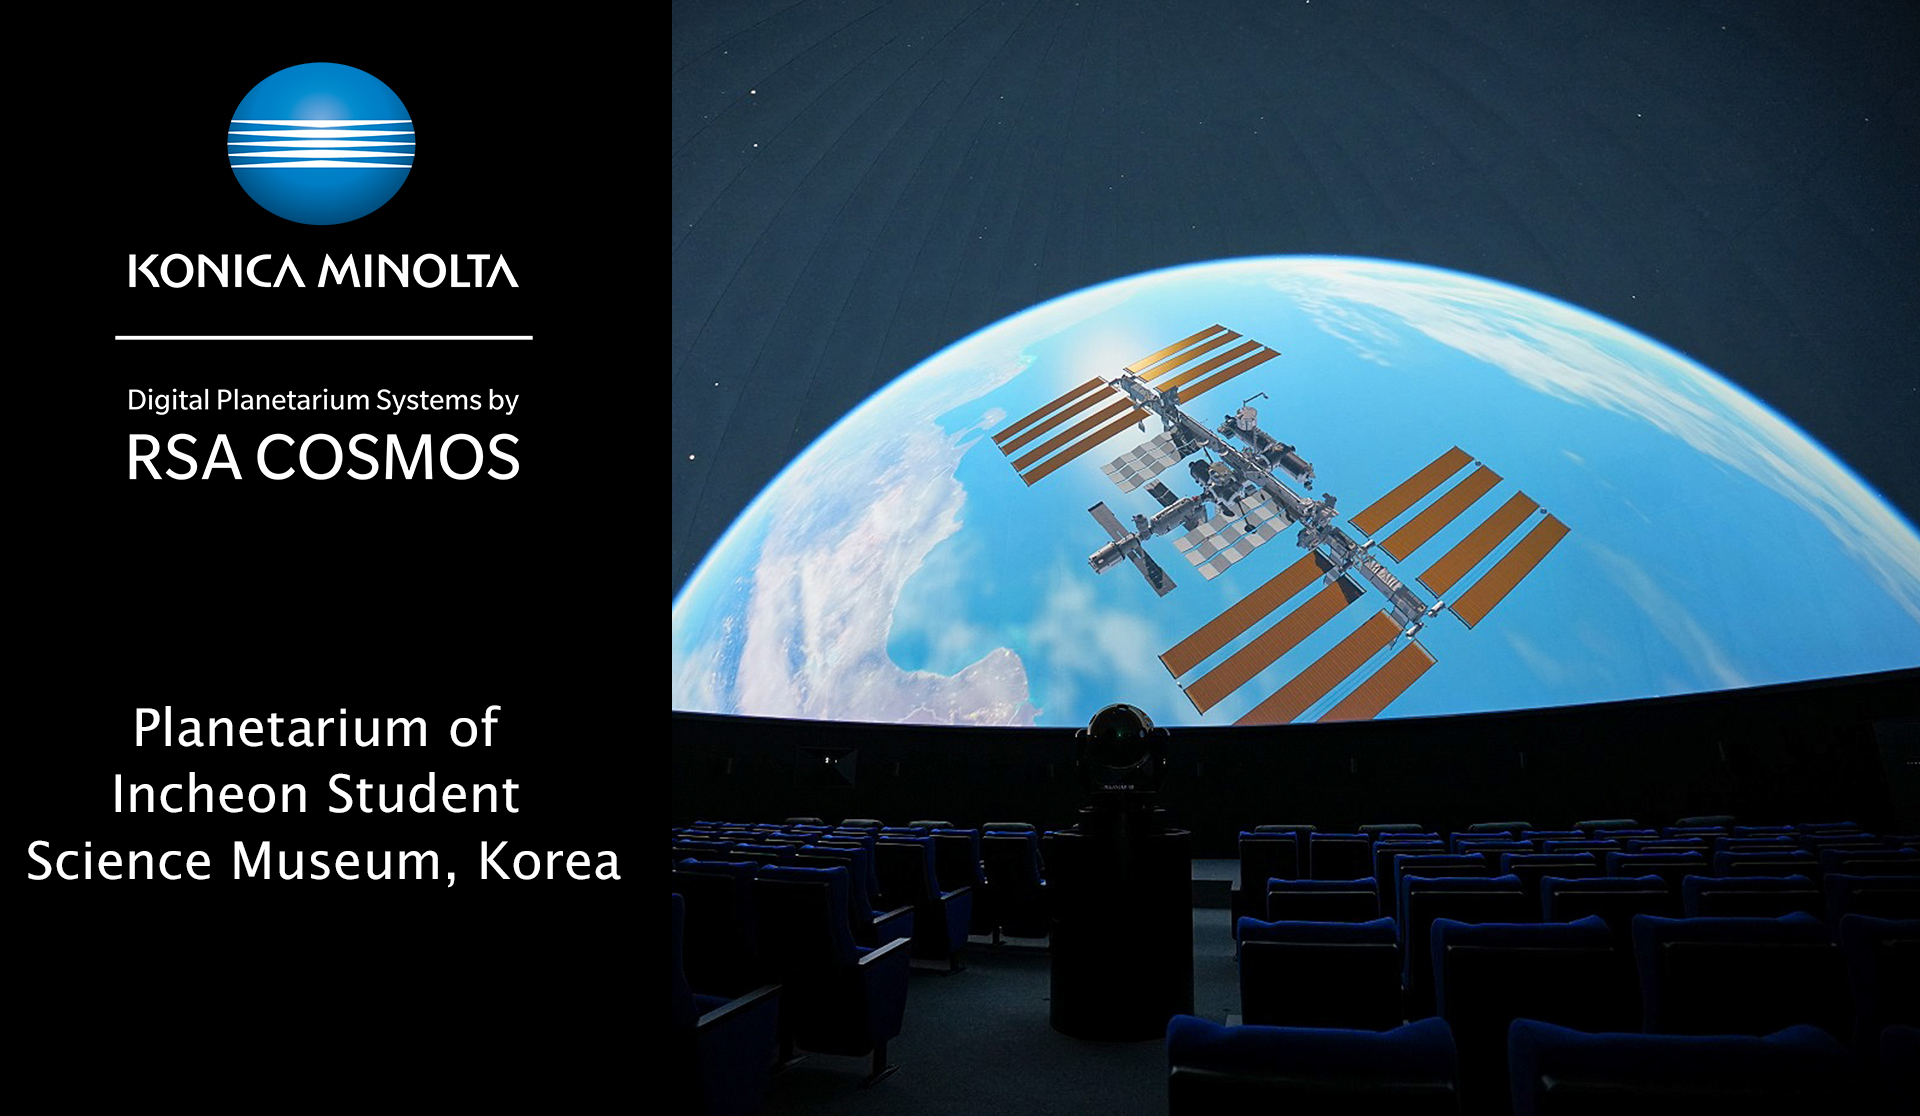 RSA Cosmos successfully renovated Incheon 15m planetarium with a 6k projection system